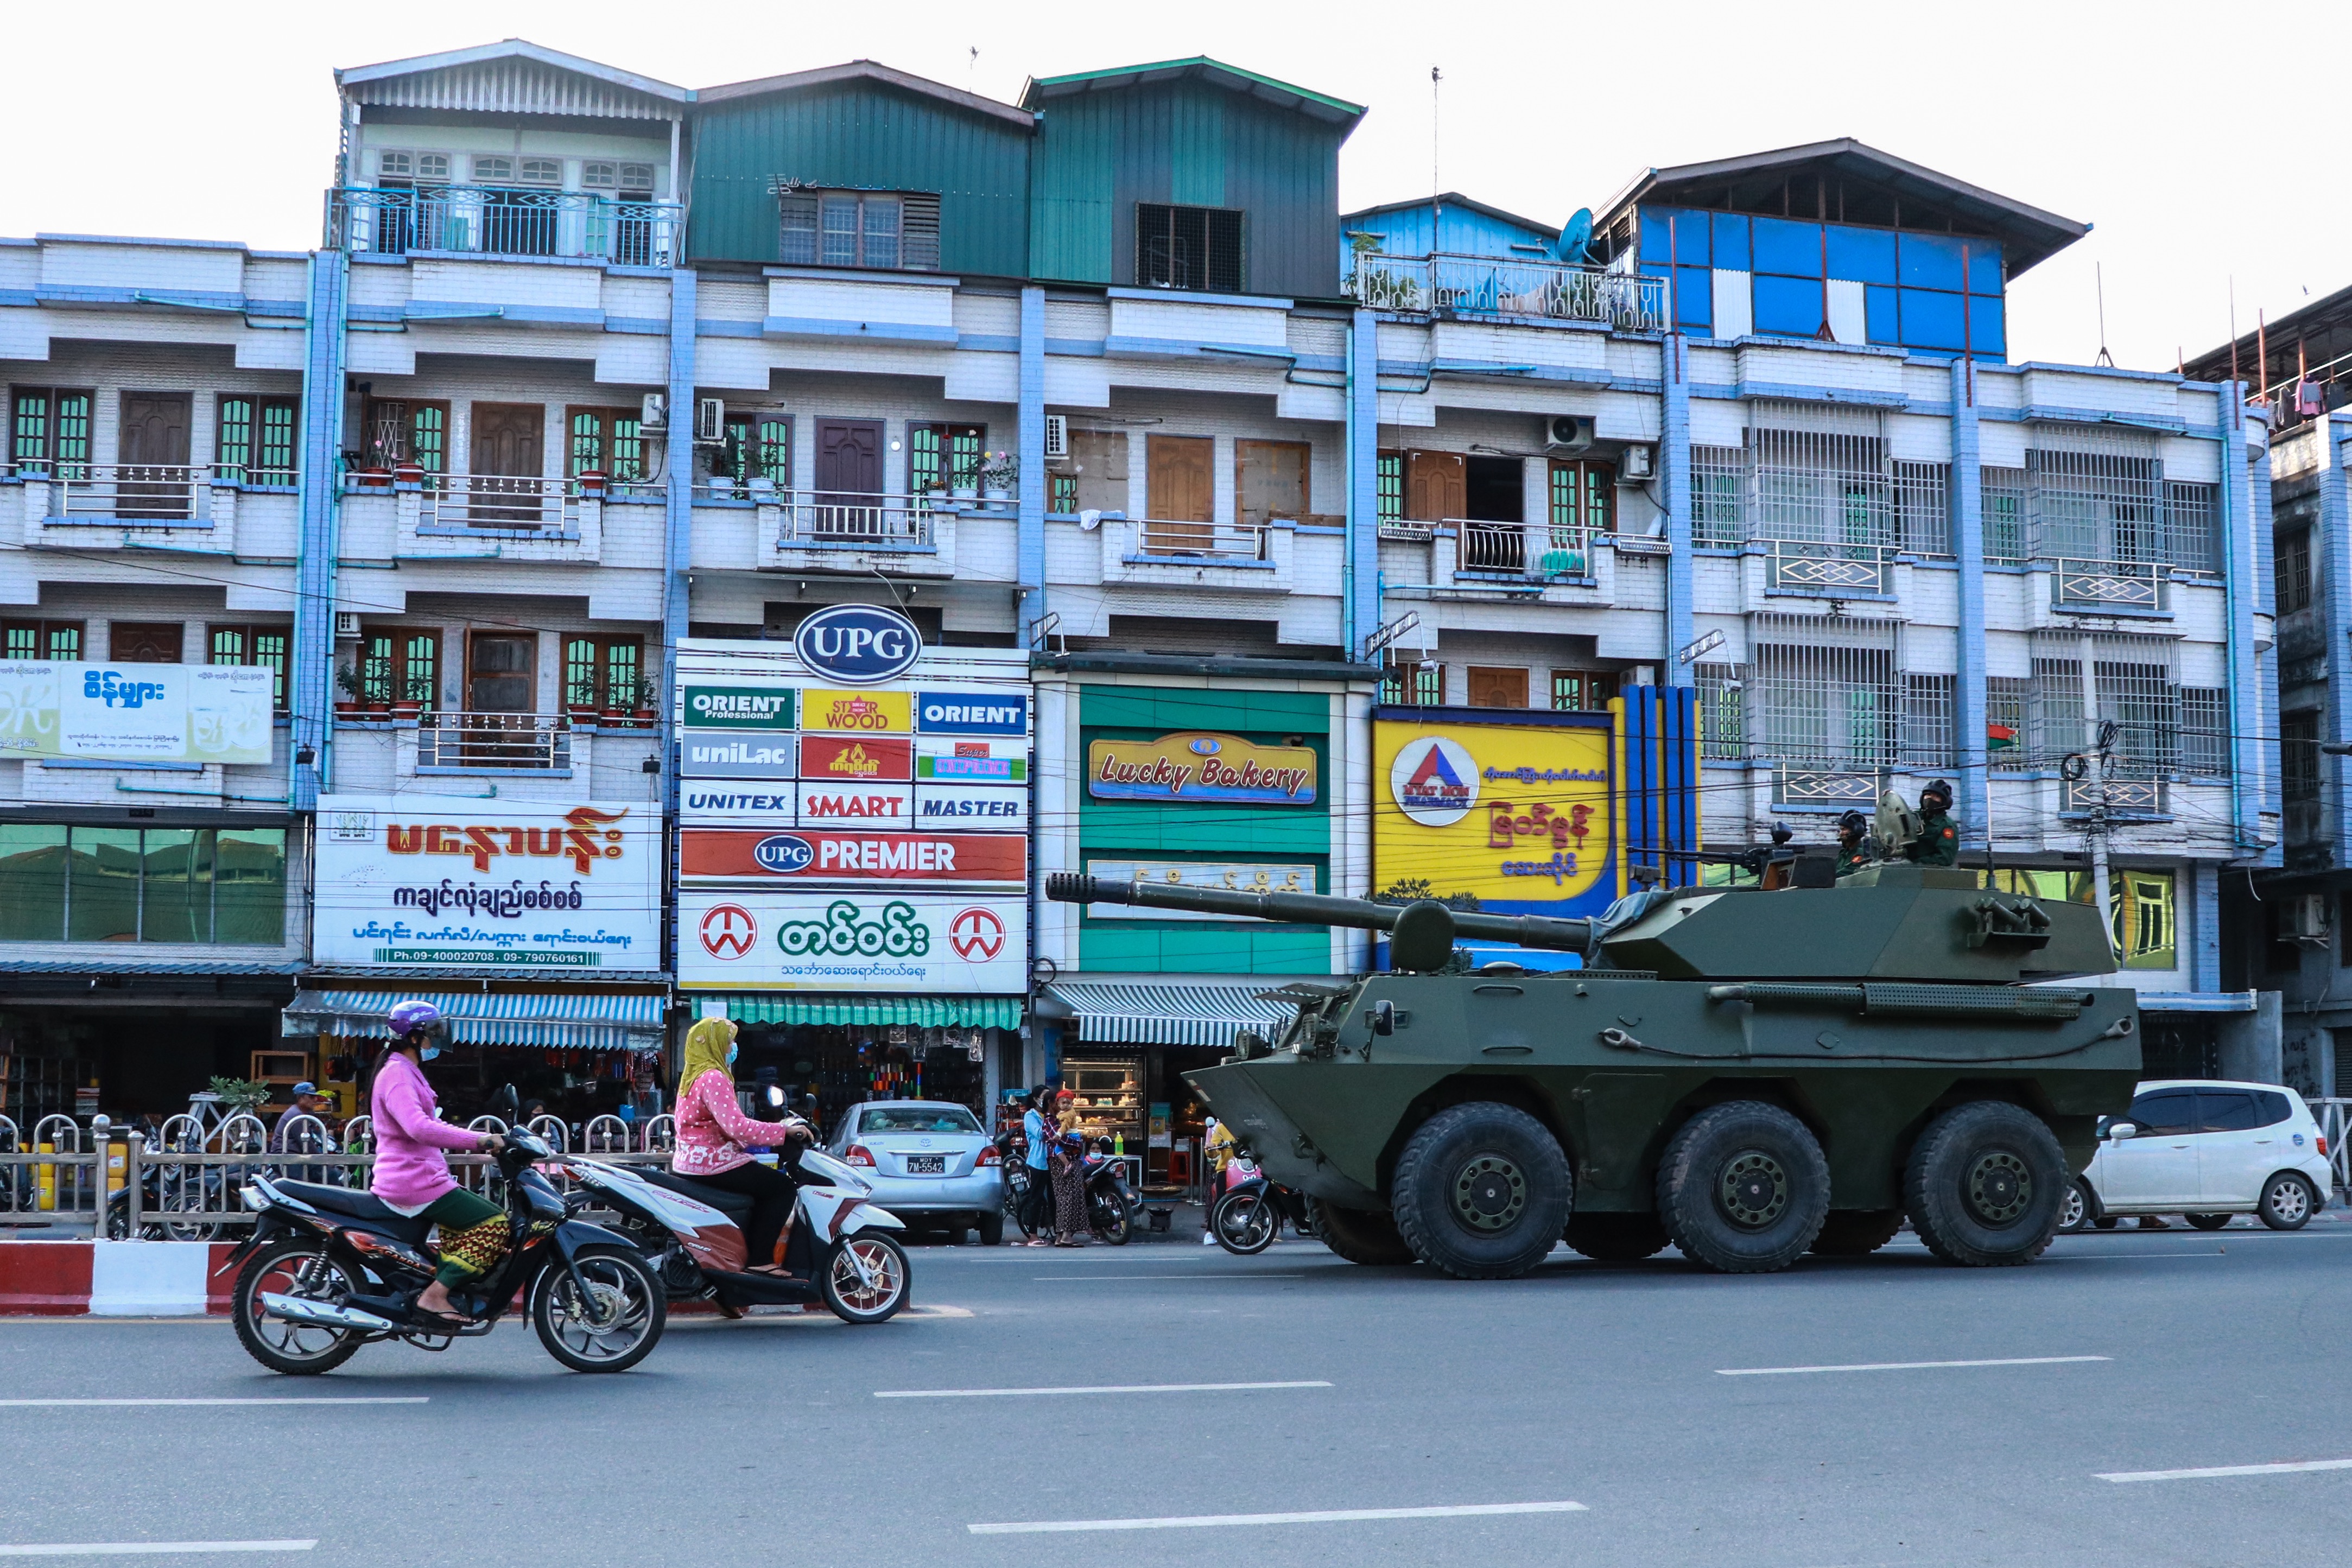 A military armoured vehicle is seen along the street. PHOTO: AFP / STRINGER